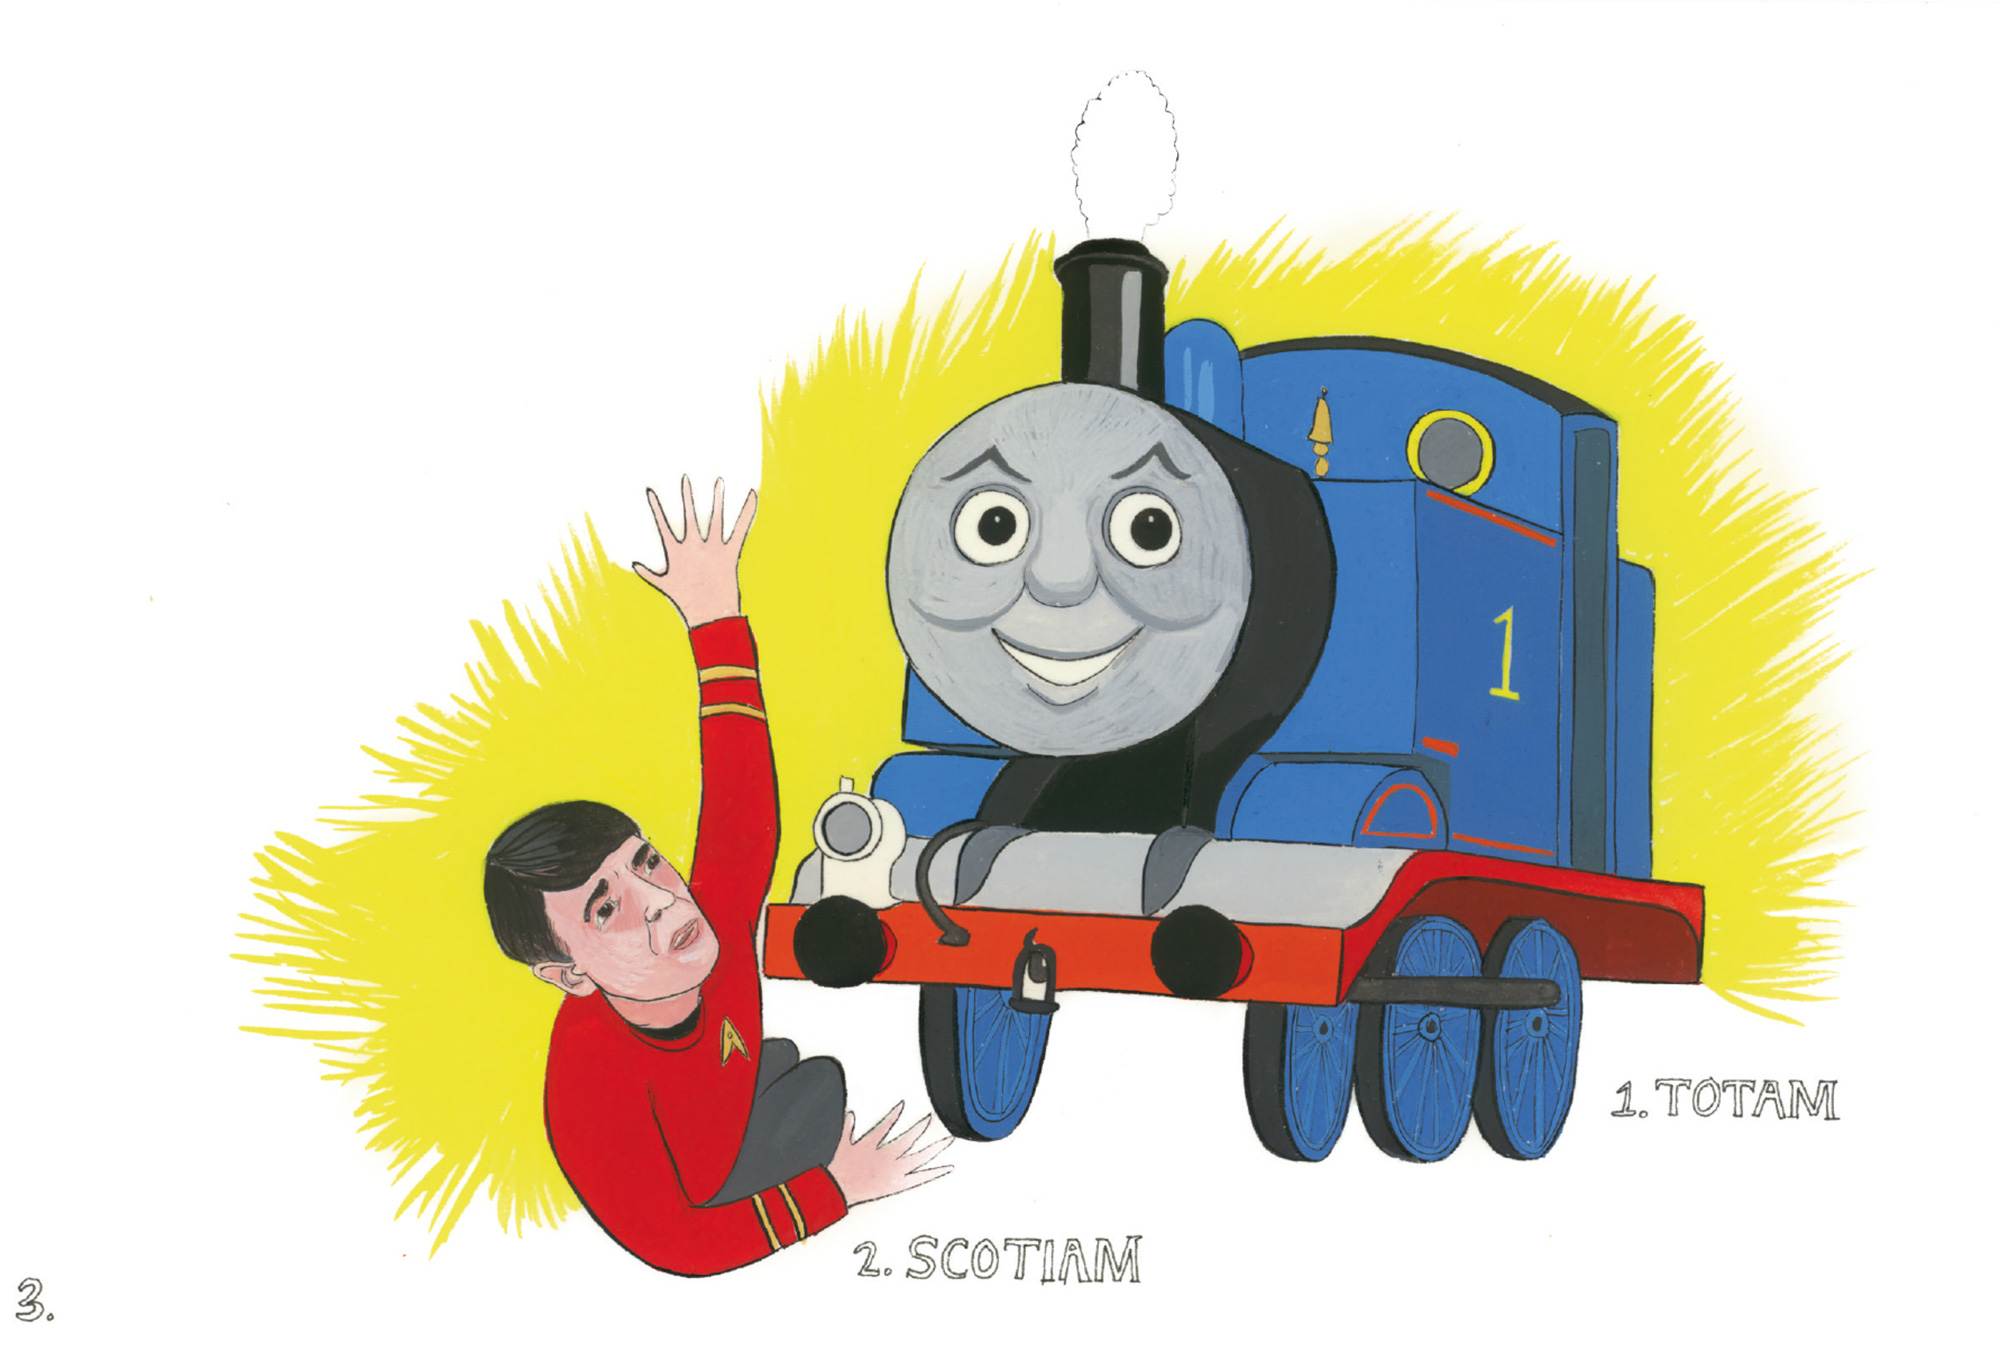 An artwork by Amy Jean Porter depicting Thomas the Tank Engine and Captain Kirk from “Star Trek.” The two figures are numbered and captioned. Respectively these captions read: “Totem” and “Scotiam.”